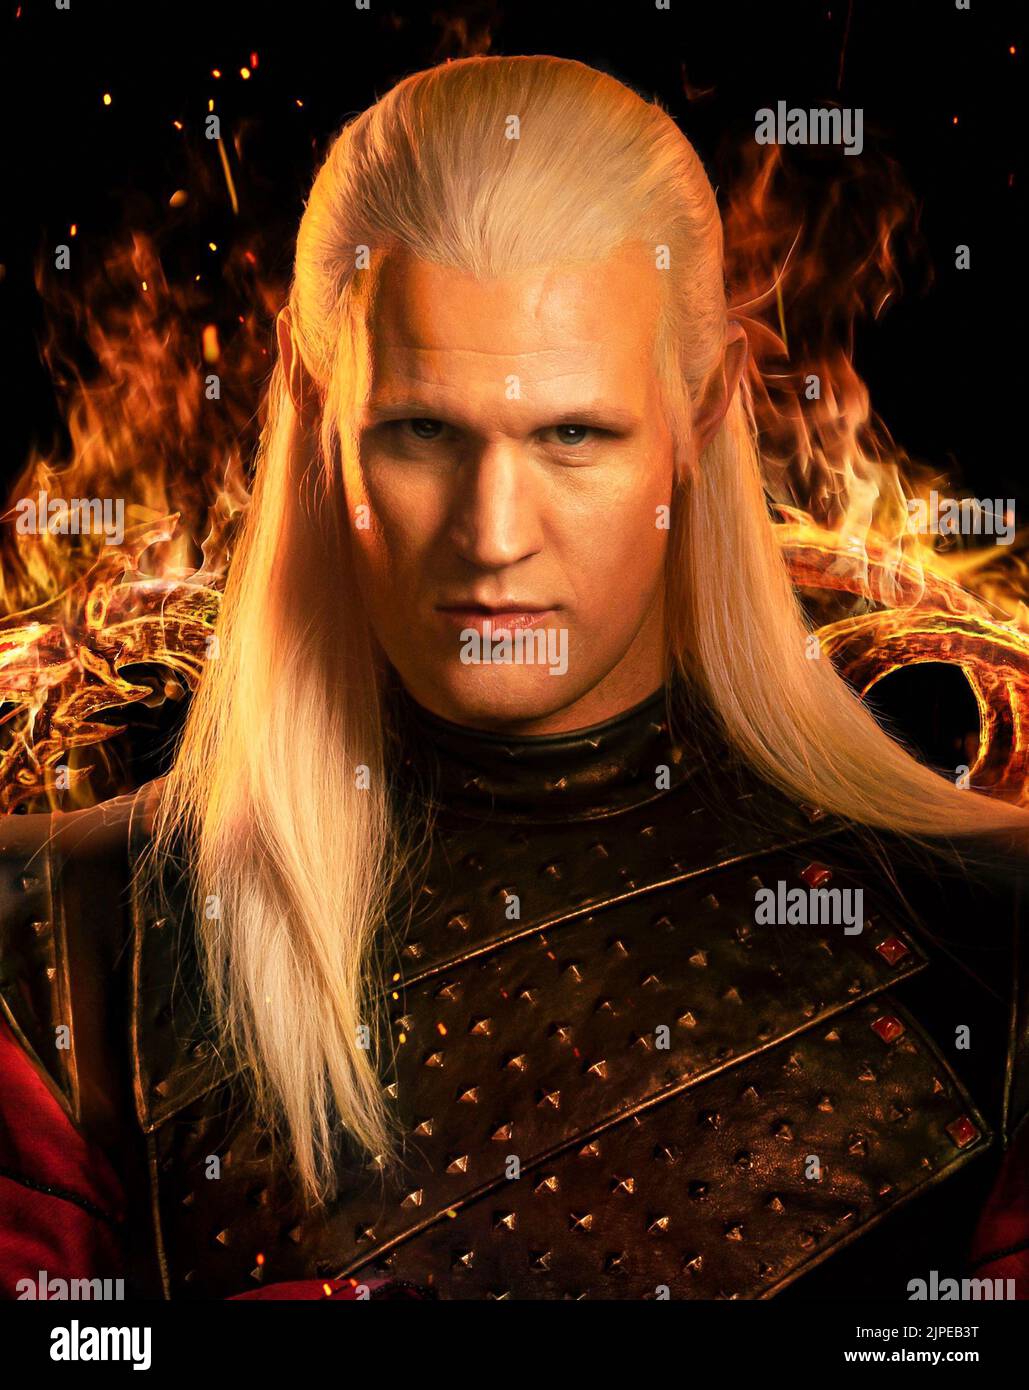 USA. Matt Smith   in the (C)HBO new series: House of the Dragon (2022).  Plot: The story of the House Targaryen set 300 years before the events of Game of Thrones (2011).  Ref: LMK106-J8255-150822 Supplied by LMKMEDIA. Editorial Only. Landmark Media is not the copyright owner of these Film or TV stills but provides a service only for recognised Media outlets. pictures@lmkmedia.com Stock Photo